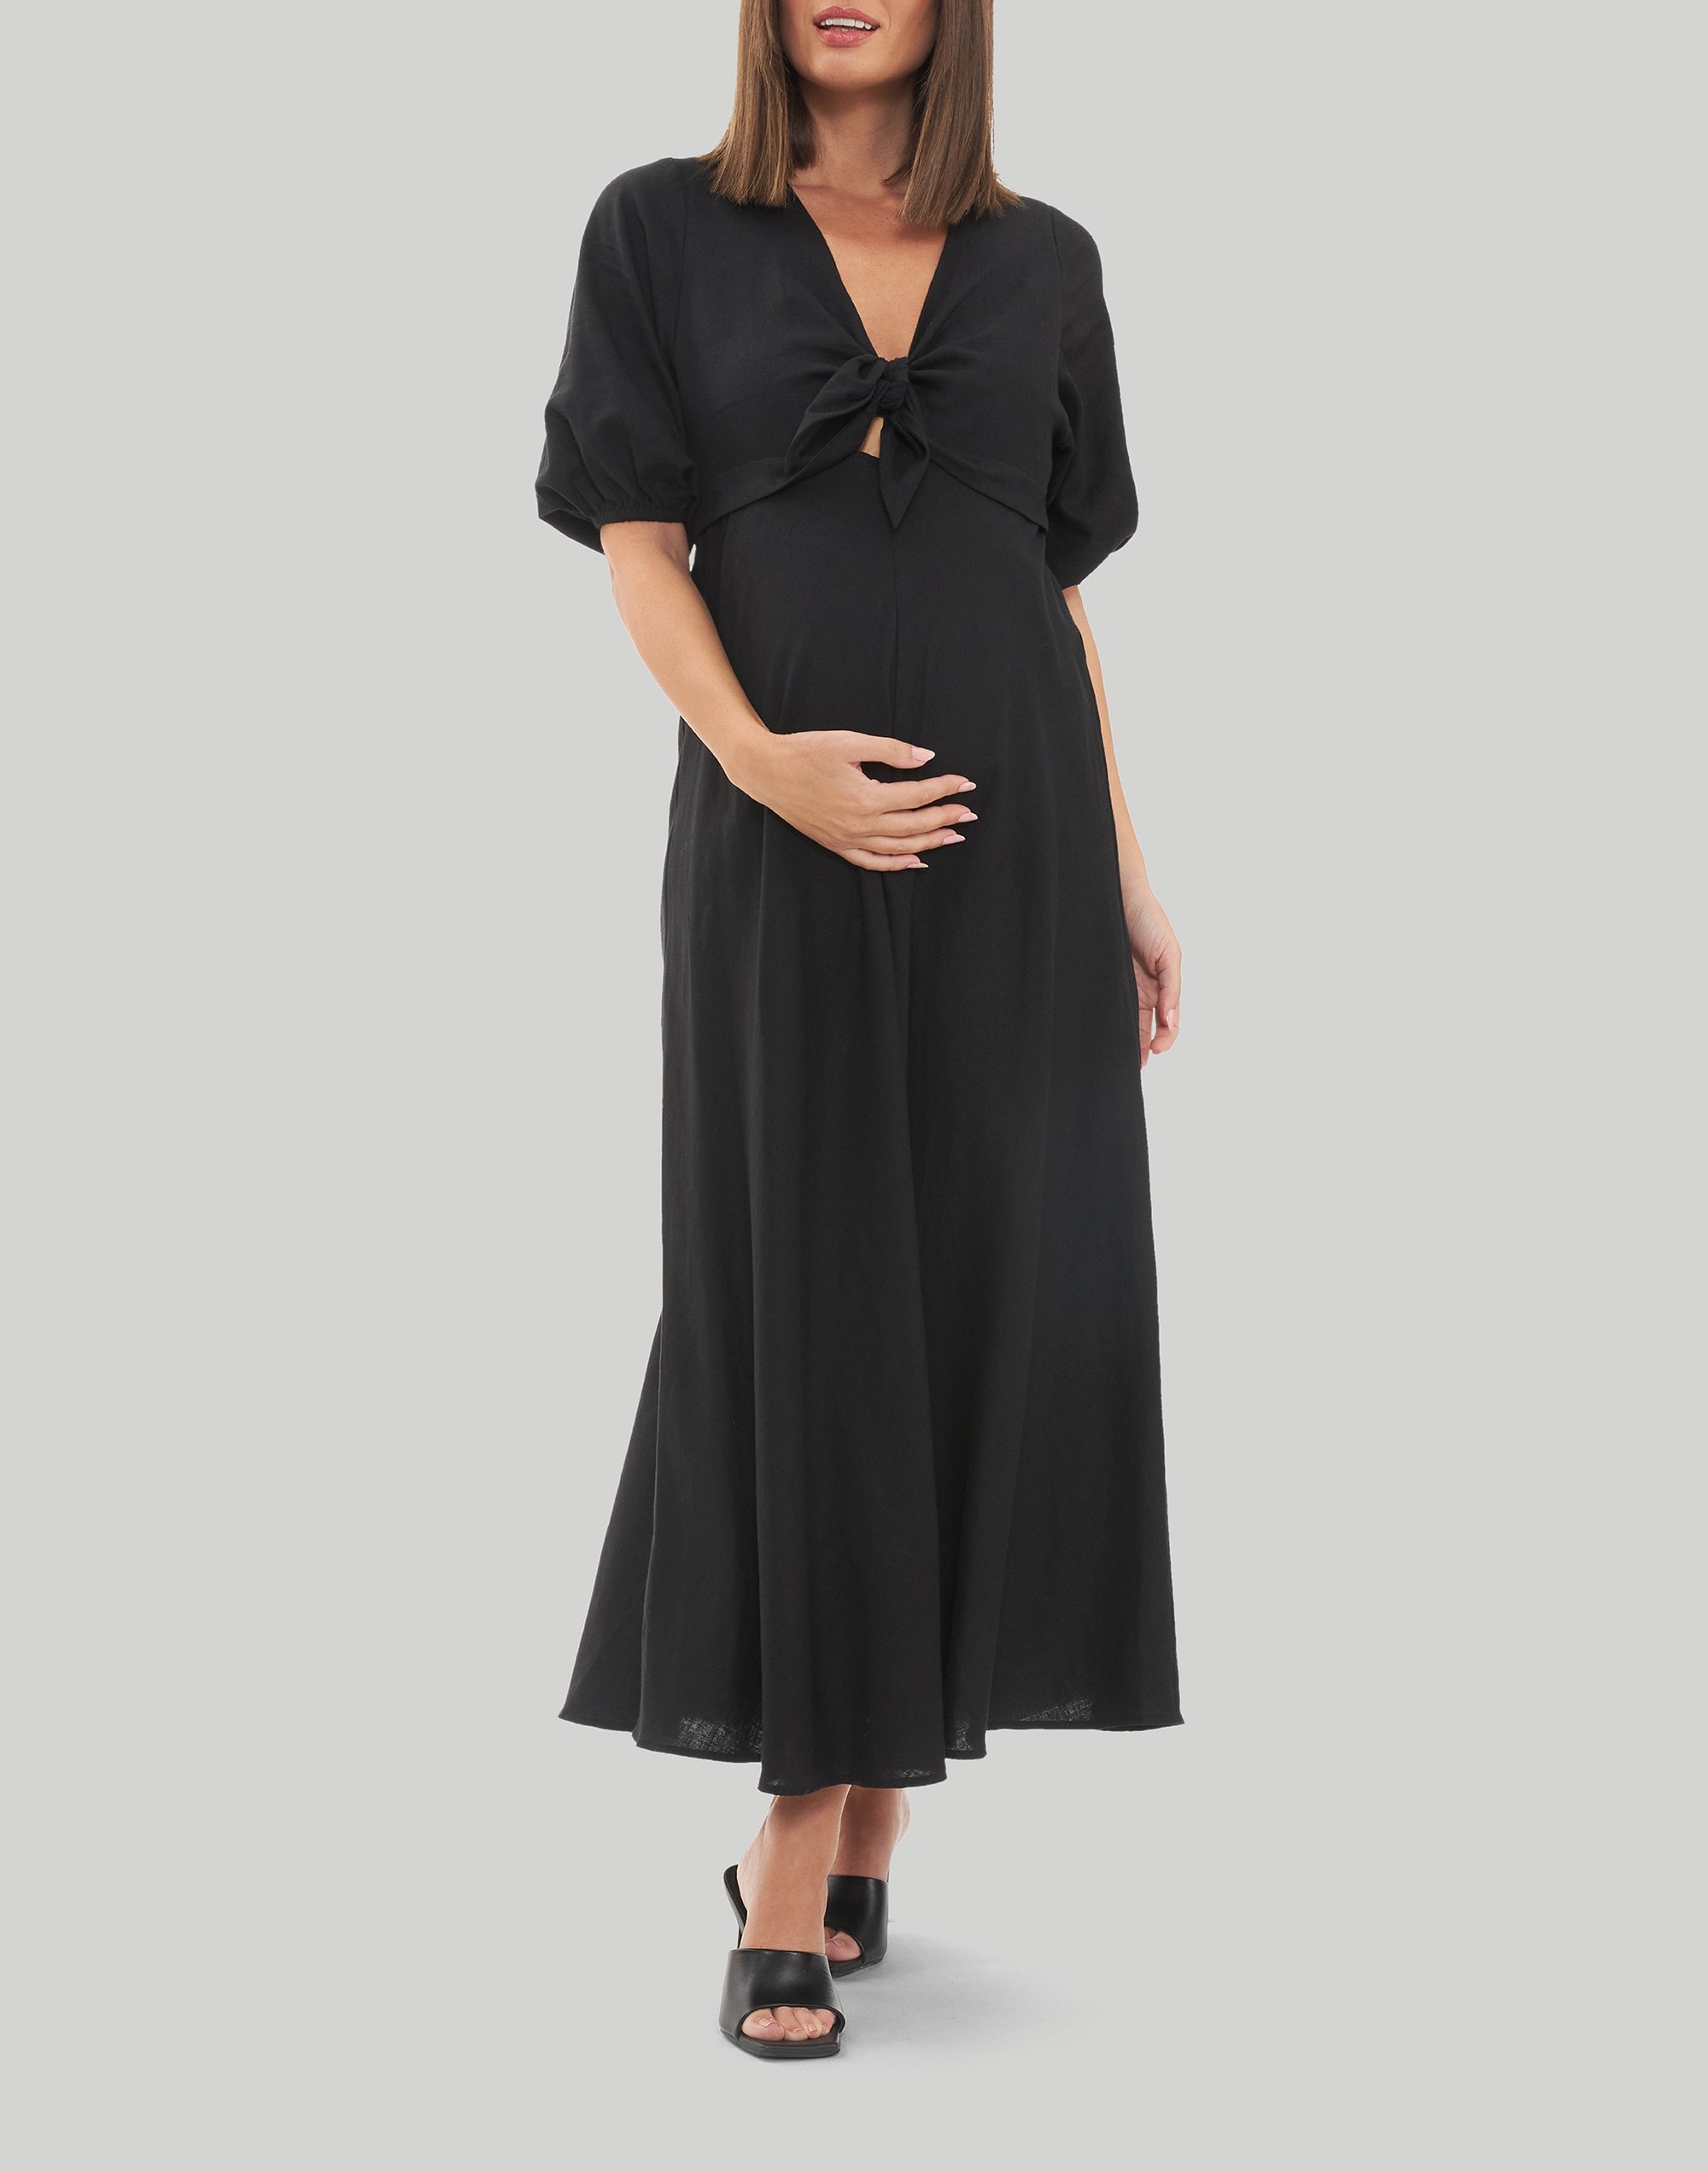 Ripe Maternity Camille Tie Front Linen Dress